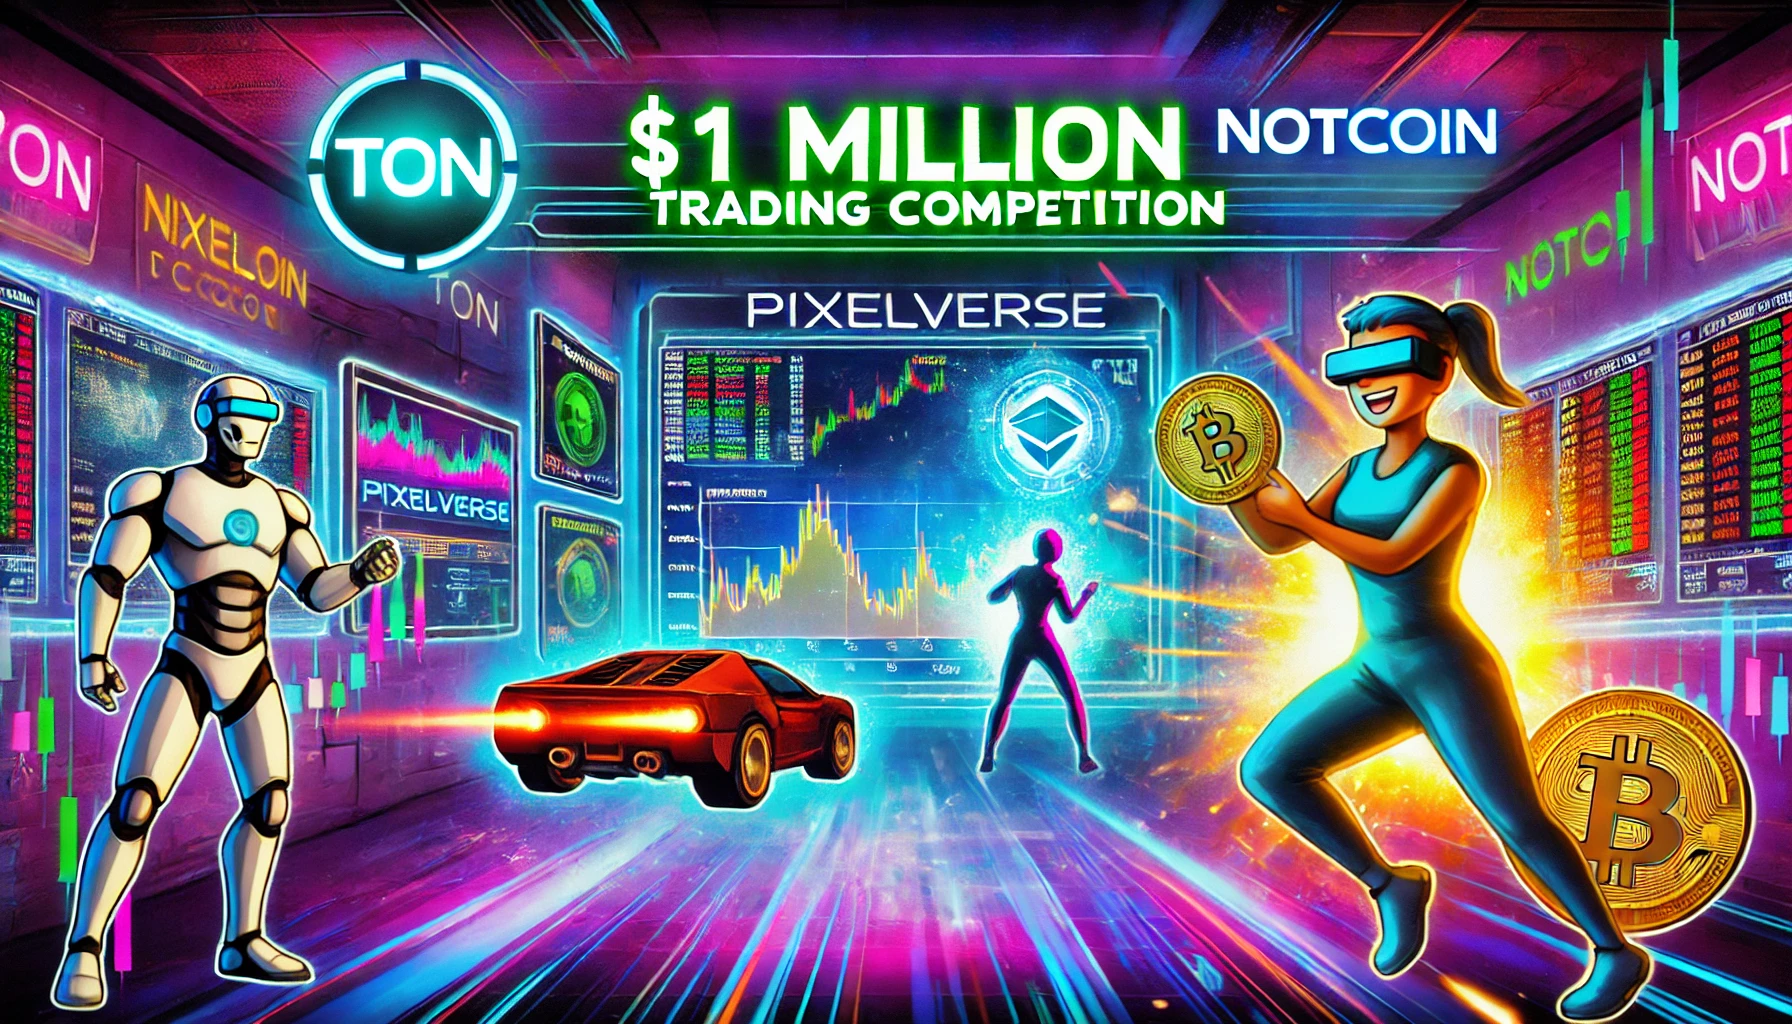 DALL·E 2024-07-18 17.42.53 - A vibrant digital illustration showing the partnership between Pixelverse and Notcoin, highlighting a $1 million trading competition. The scene featur